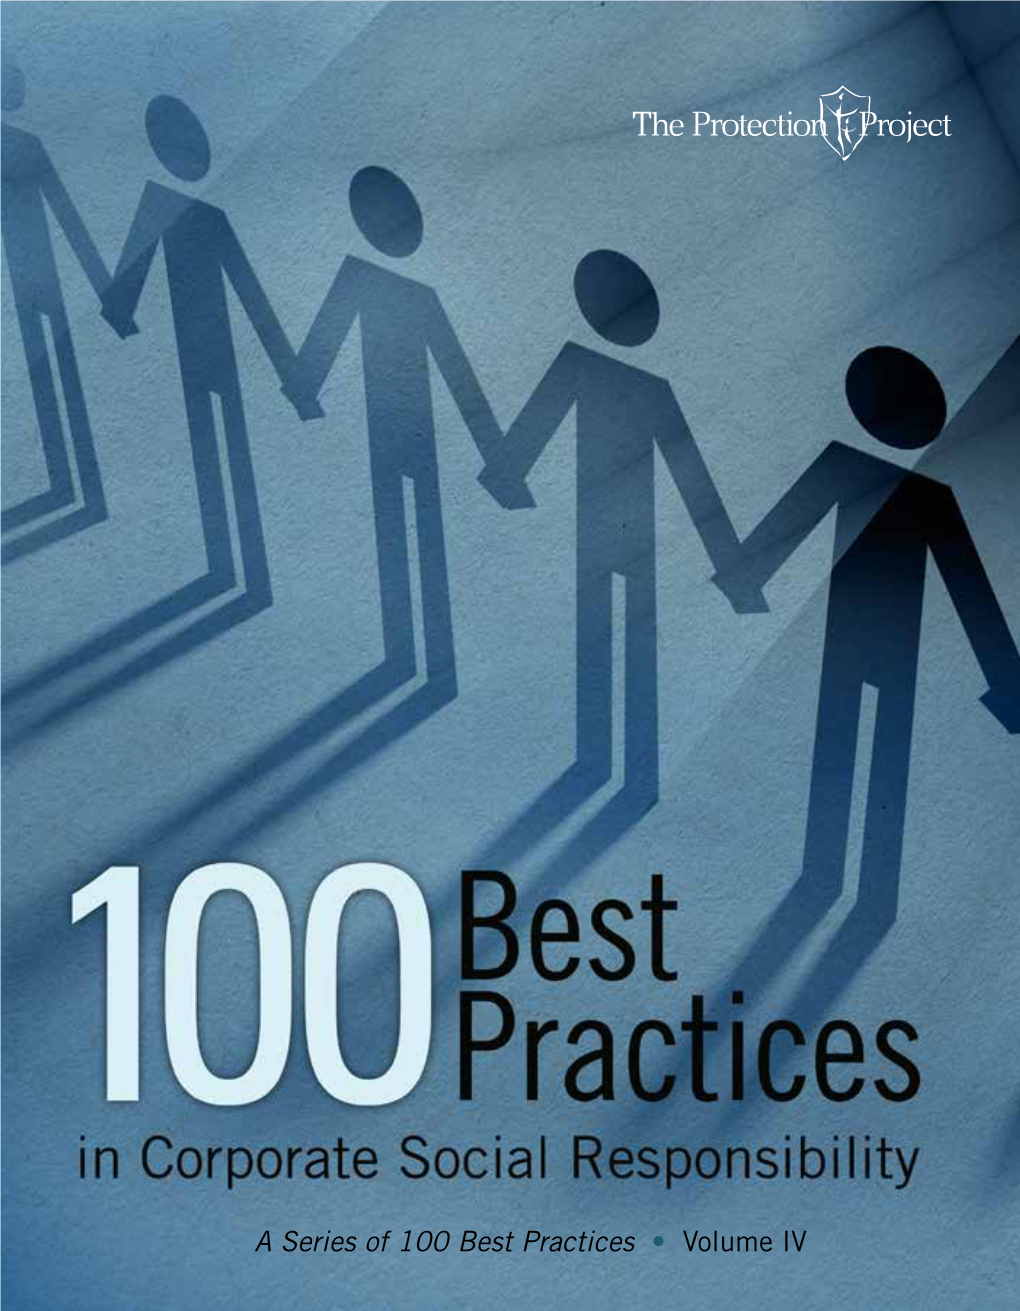 A Series of 100 Best Practices • Volume IV in Corporate Social Responsibility